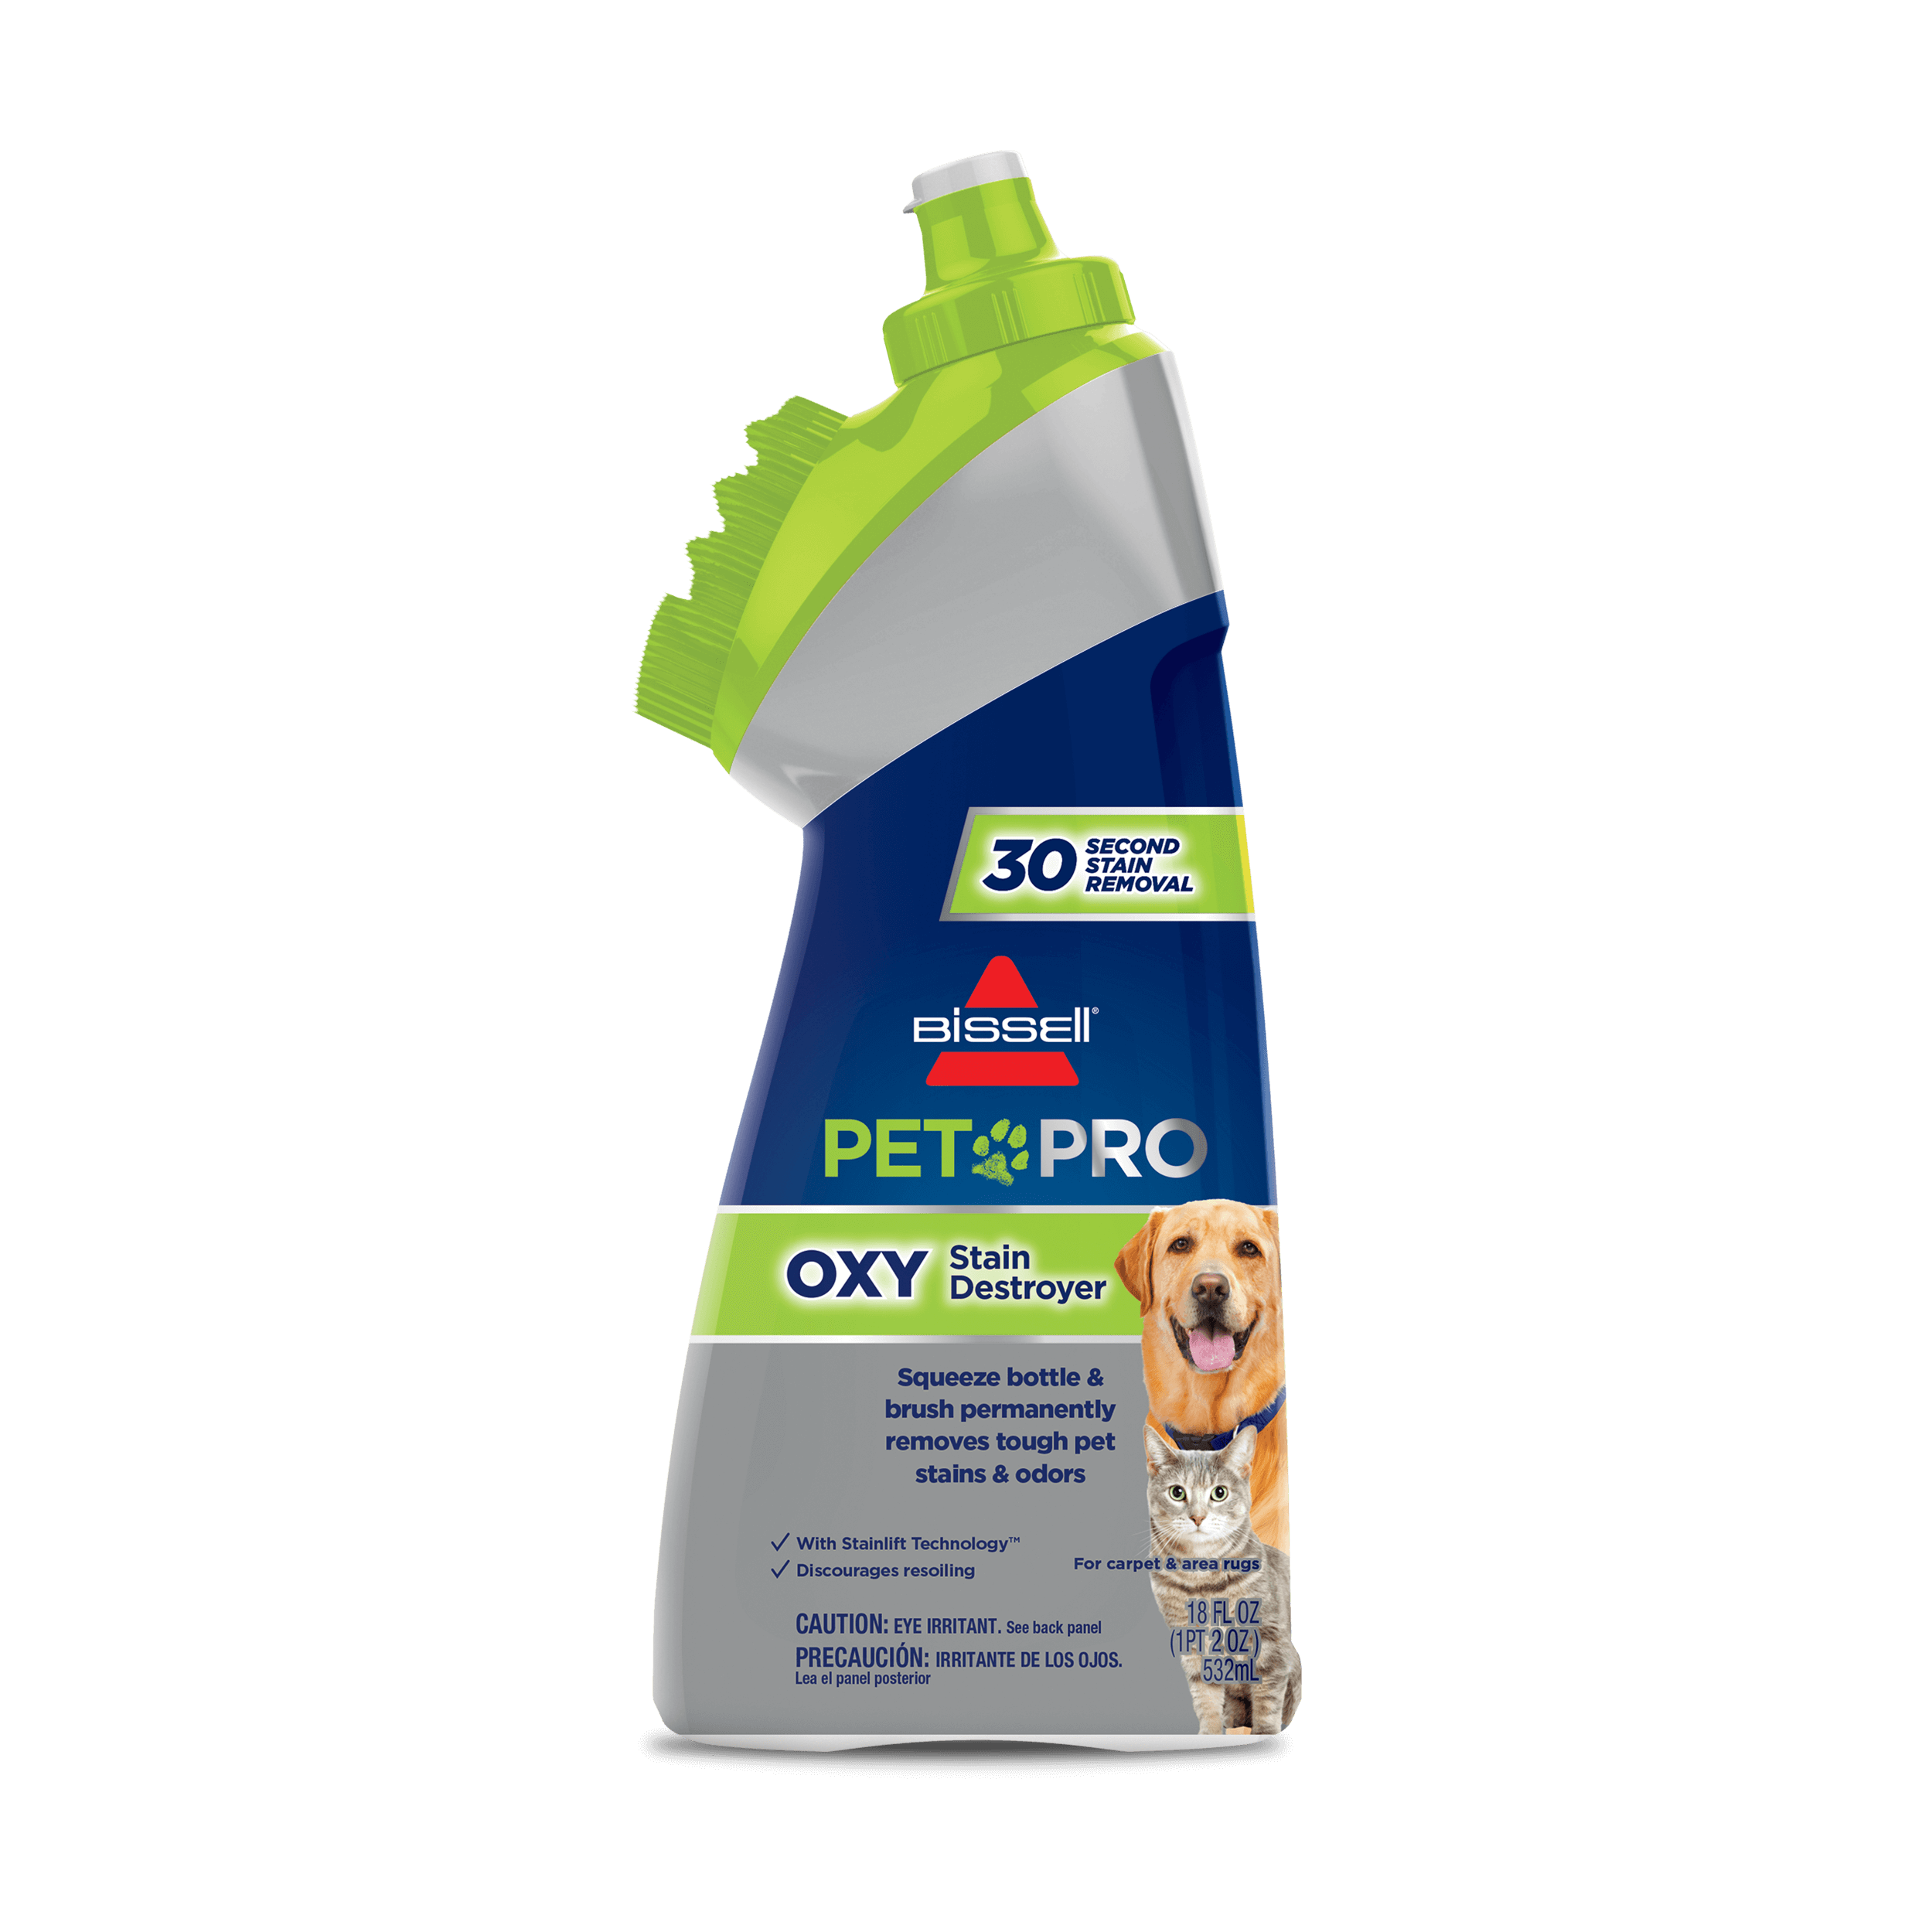 BISSELL PET PRO OXY Stain Destroyer 1766 | Carpet Cleaner